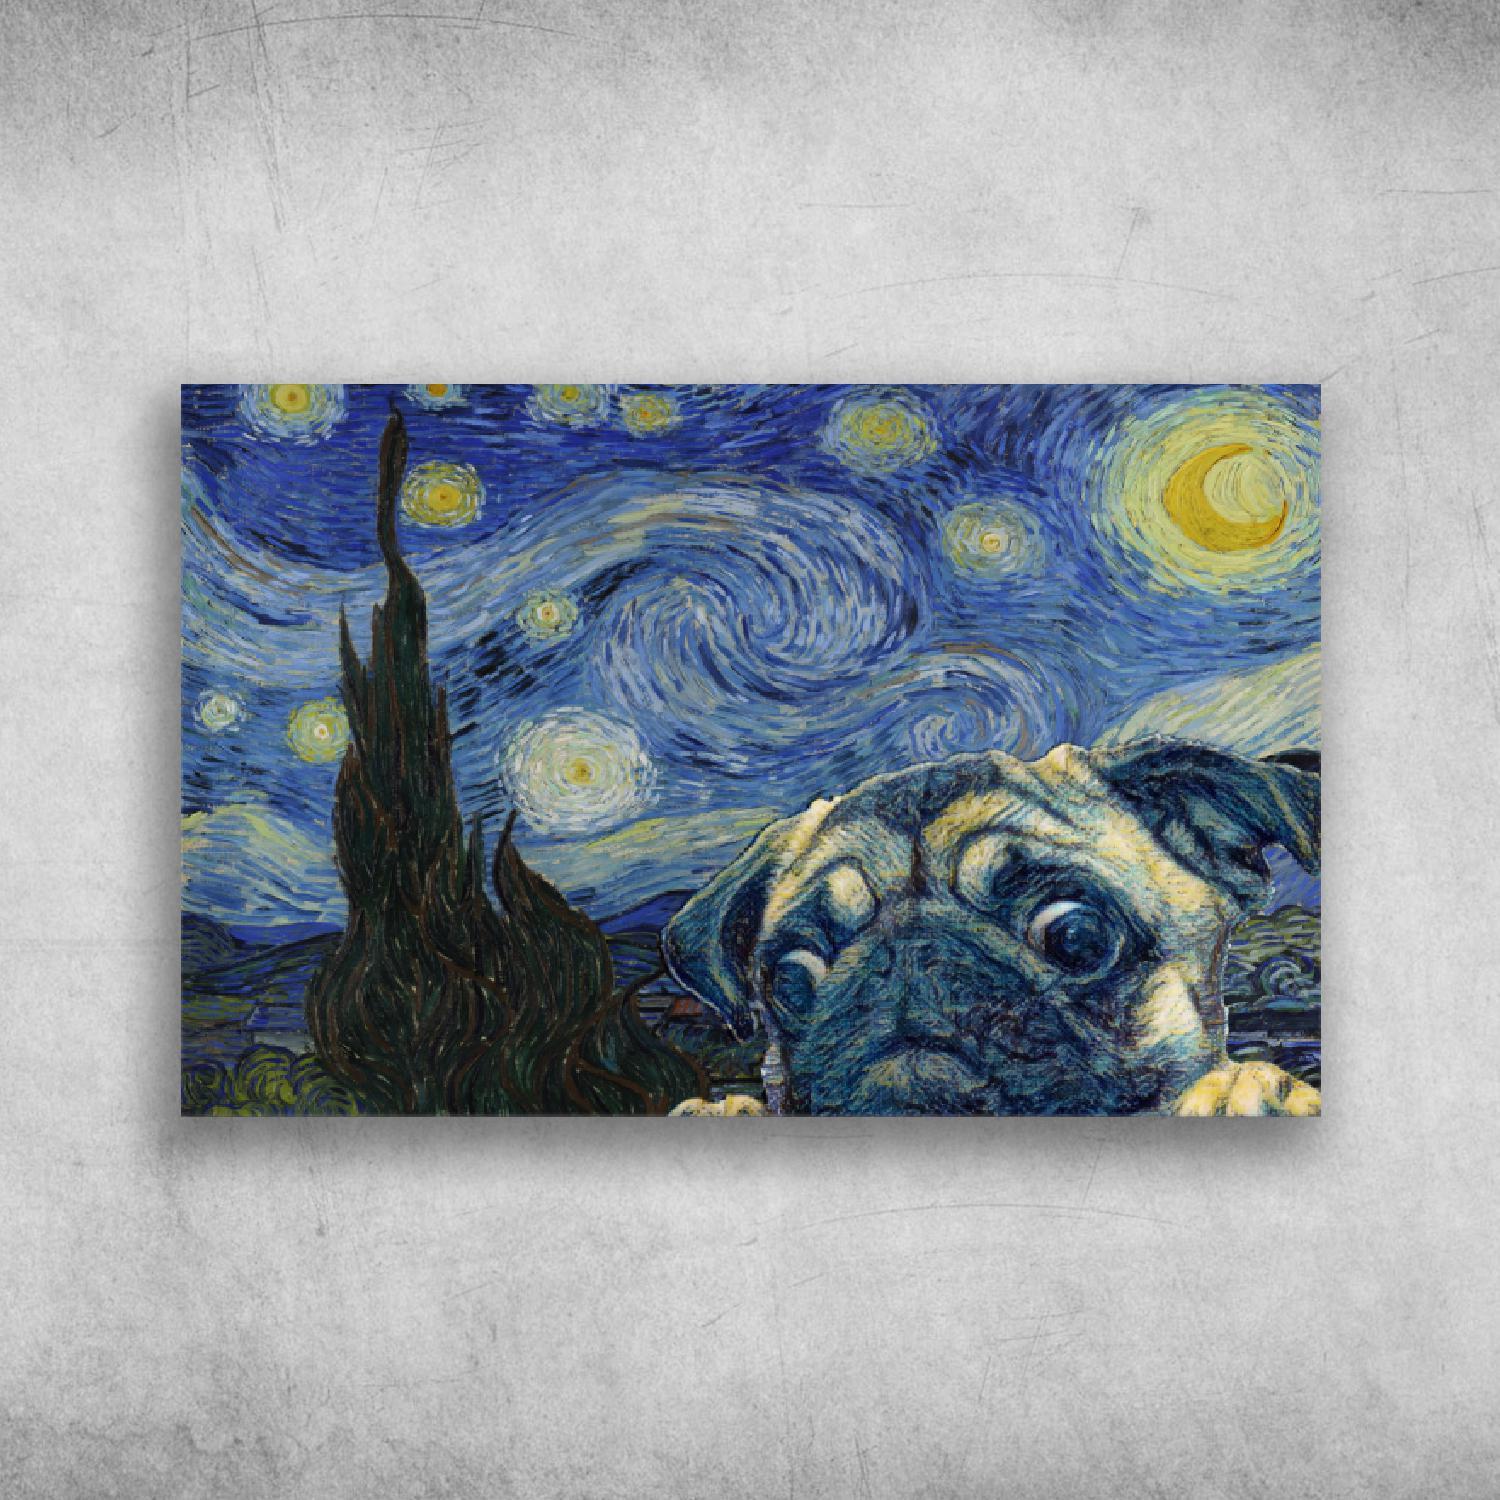 Starry Night With Pug Dog Poster Print Wall Art Canvas Wall Decor